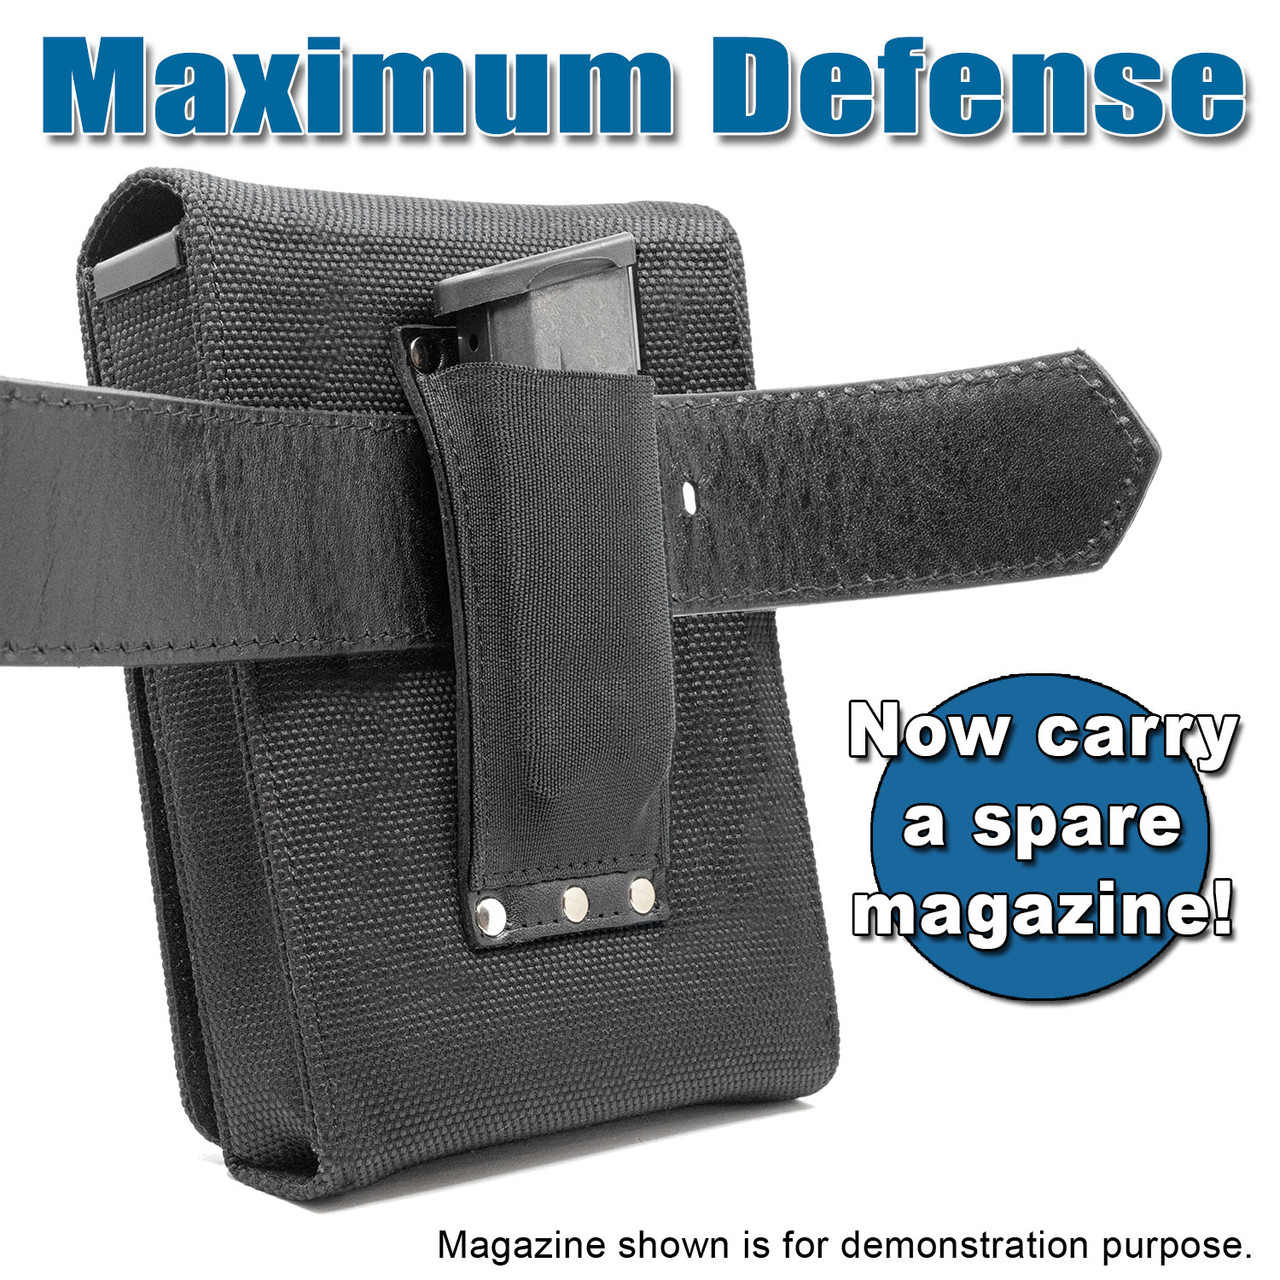 The Kahr PM45 Max Defense Holster